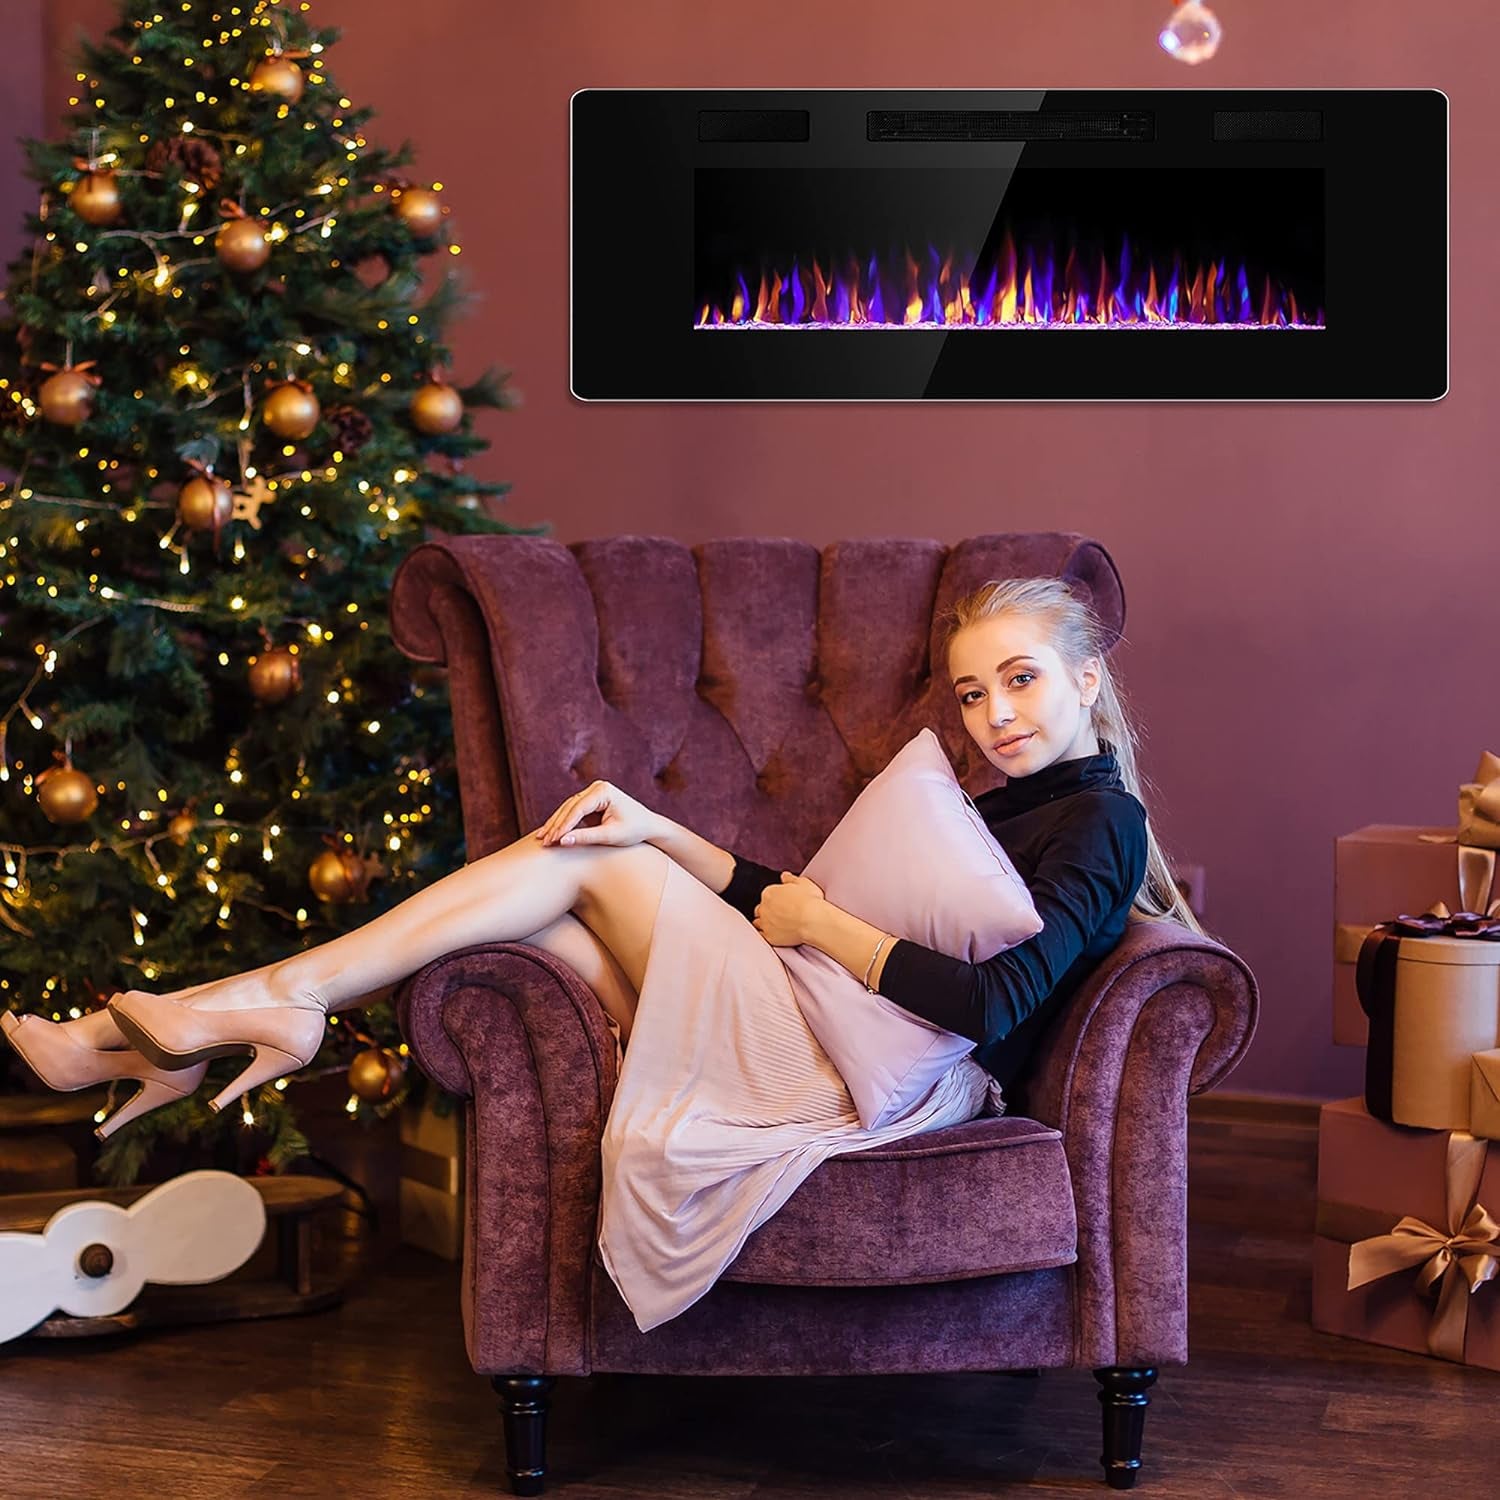 42 Inches Electric Fireplace Recessed and Wall Mounted Electric Fireplace, Fireplace Heater and Linear Fireplace, with Timer, Remote Control, Adjustable Flame Color, 750W/1500W, Black